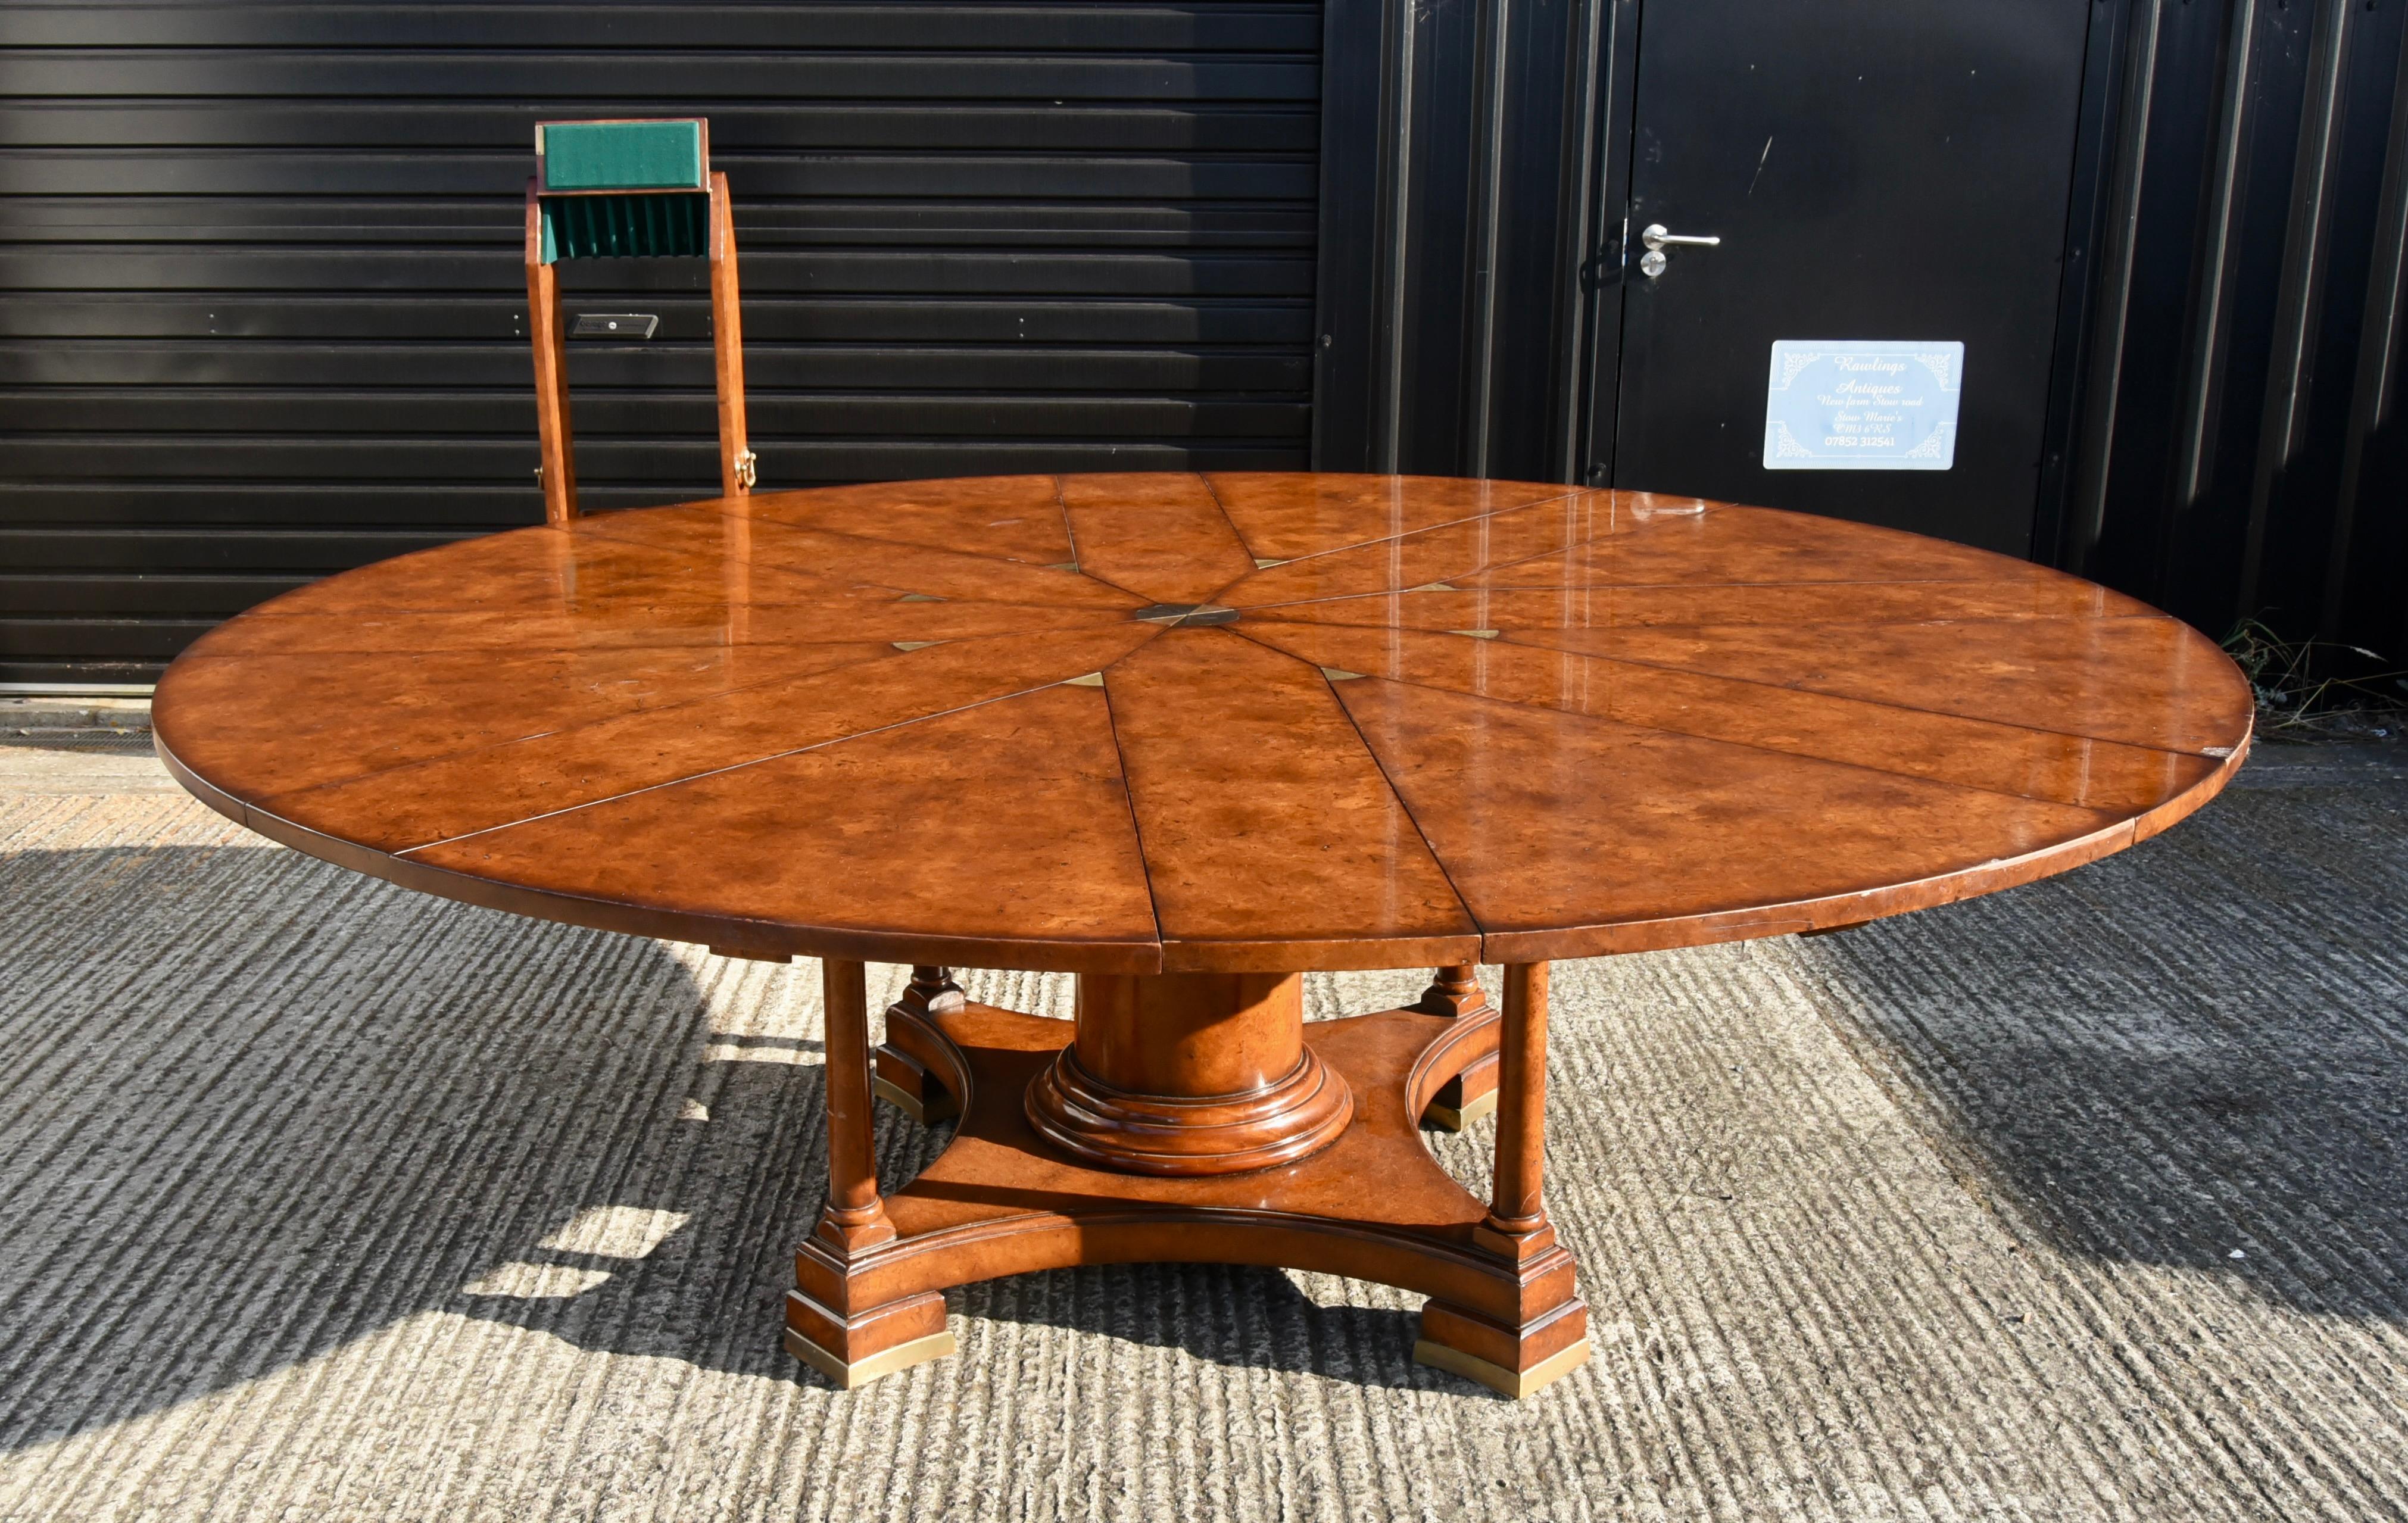 A superb quality burr oak expanding Jupe table hand made to the original method
 Robert Jupe's table is one of the most novel designs of the 19th Century. This table is hard to beat for sheer ingenuity. This table was largly built throughout the